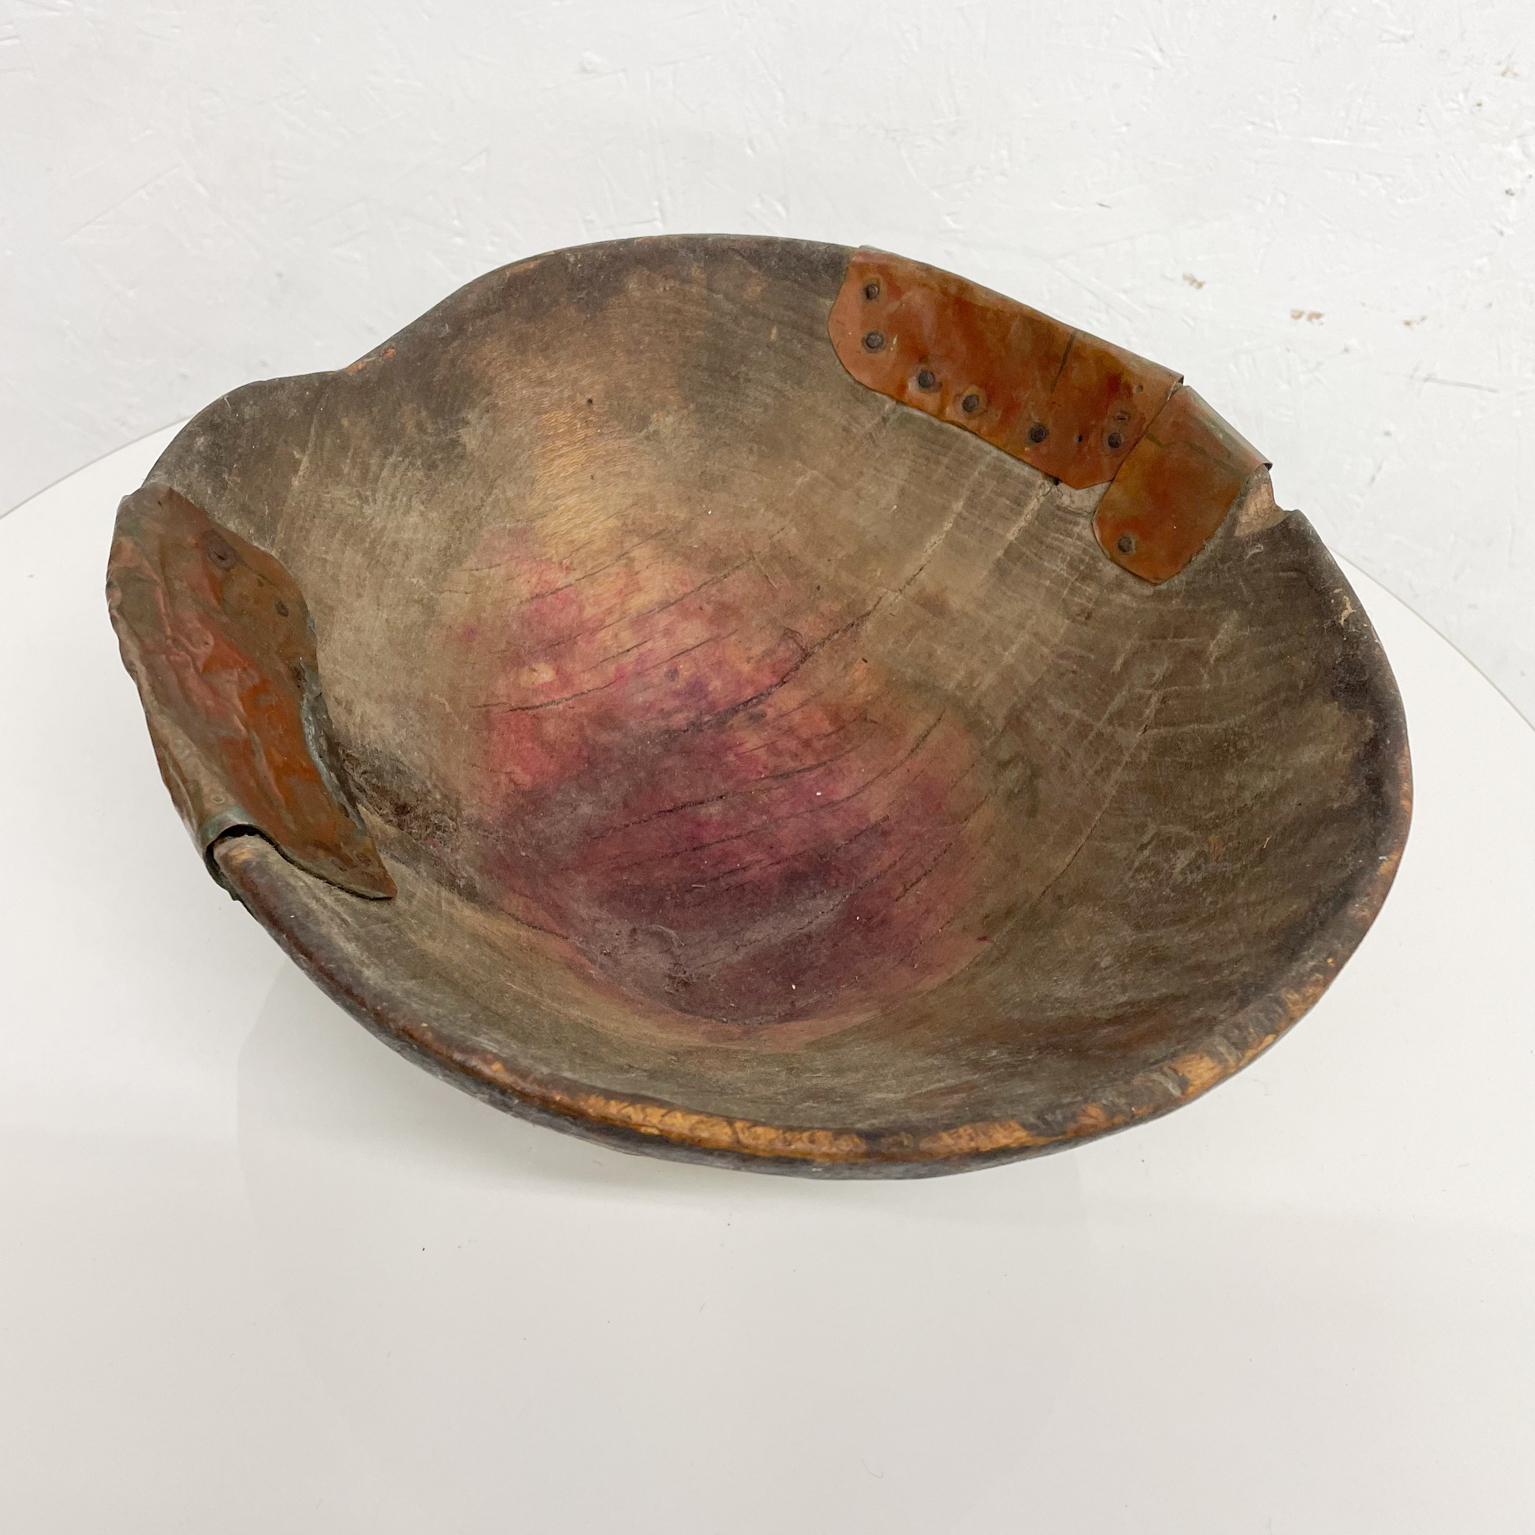 Handmade Sculptural Antique Rustic Wood Bowl with Decorative Copper 4